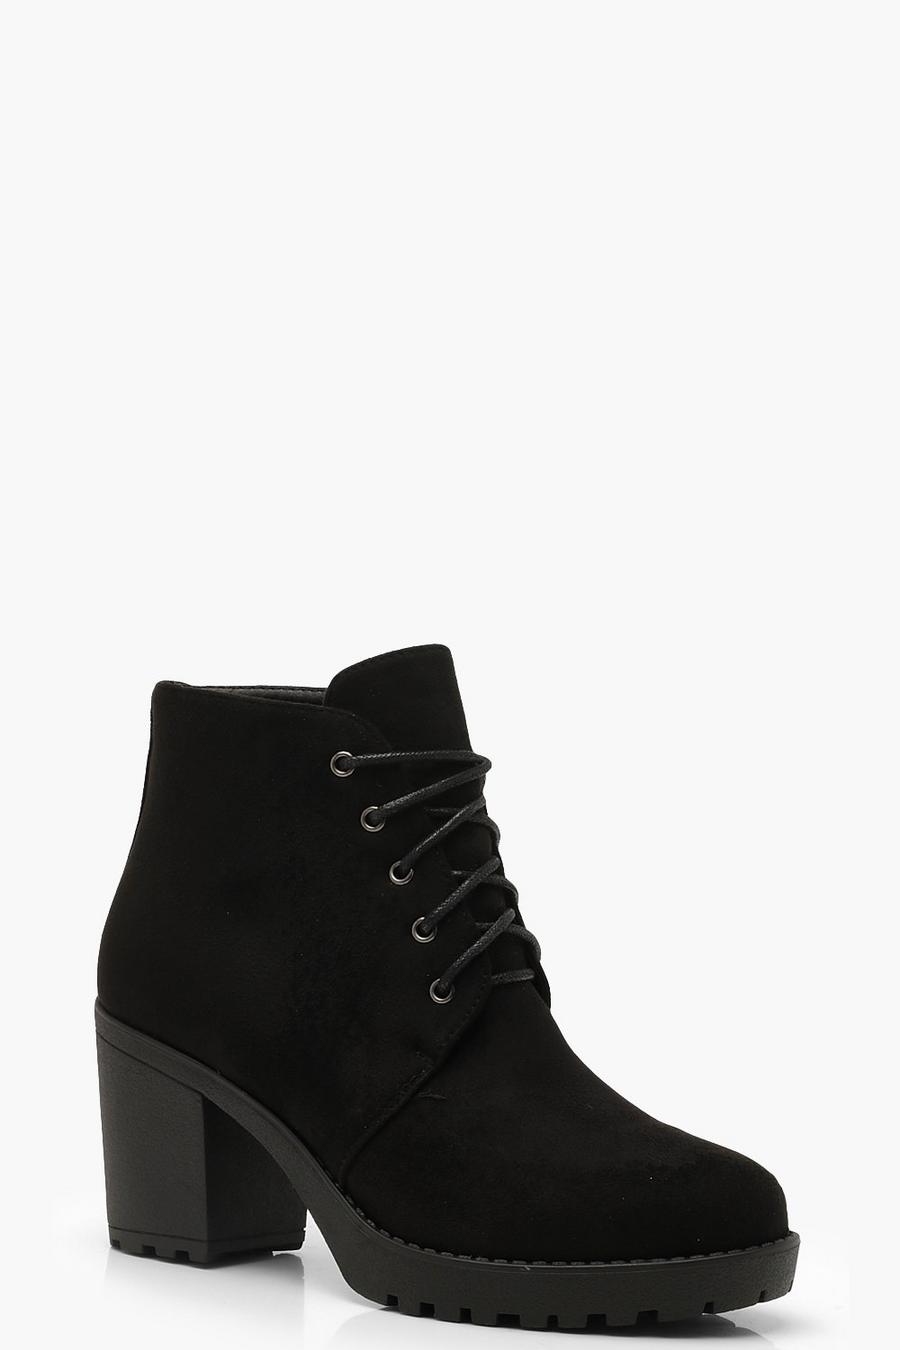 Black Lace Up Chunky Heel Hiker Boots